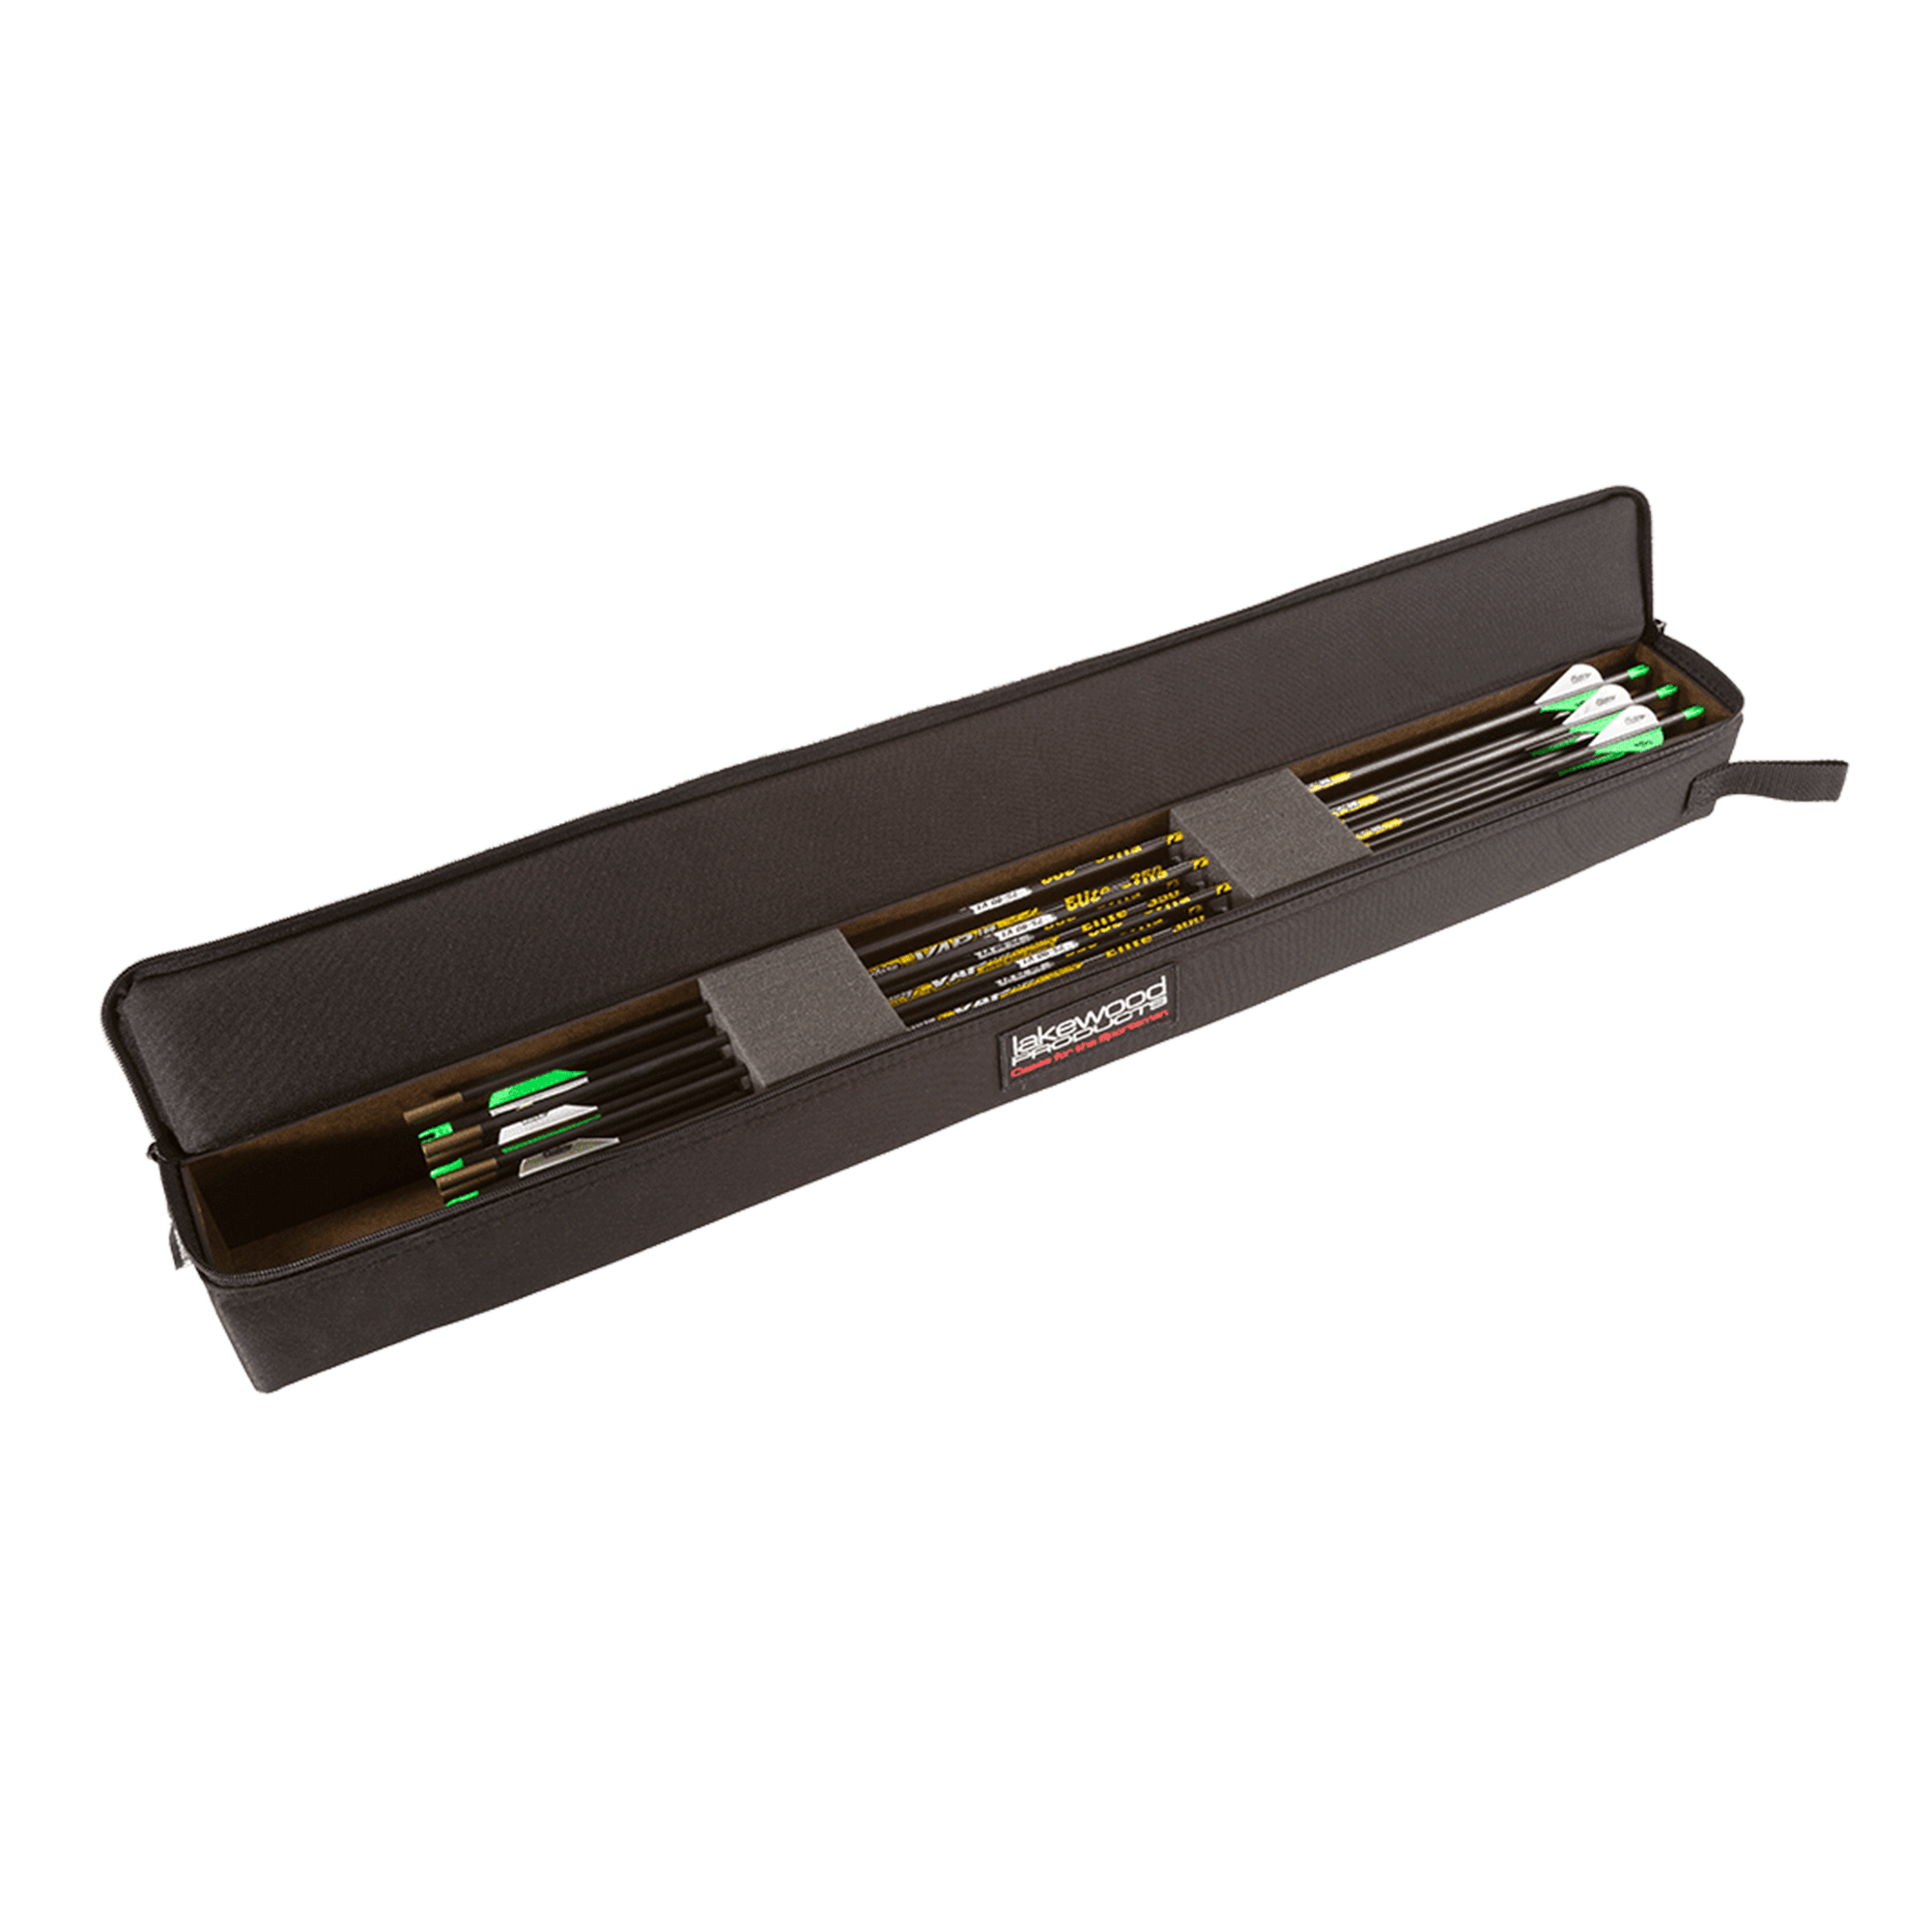 The Lakewood Products Arrow Case is designed to fit into arrow storage compartment of our bow cases or can be used individually to protect your arrows. Holds up to 18 arrows in internal foam compartments. Allows you to leave broadheads attached. Made in the USA. Lifetime Warranty.